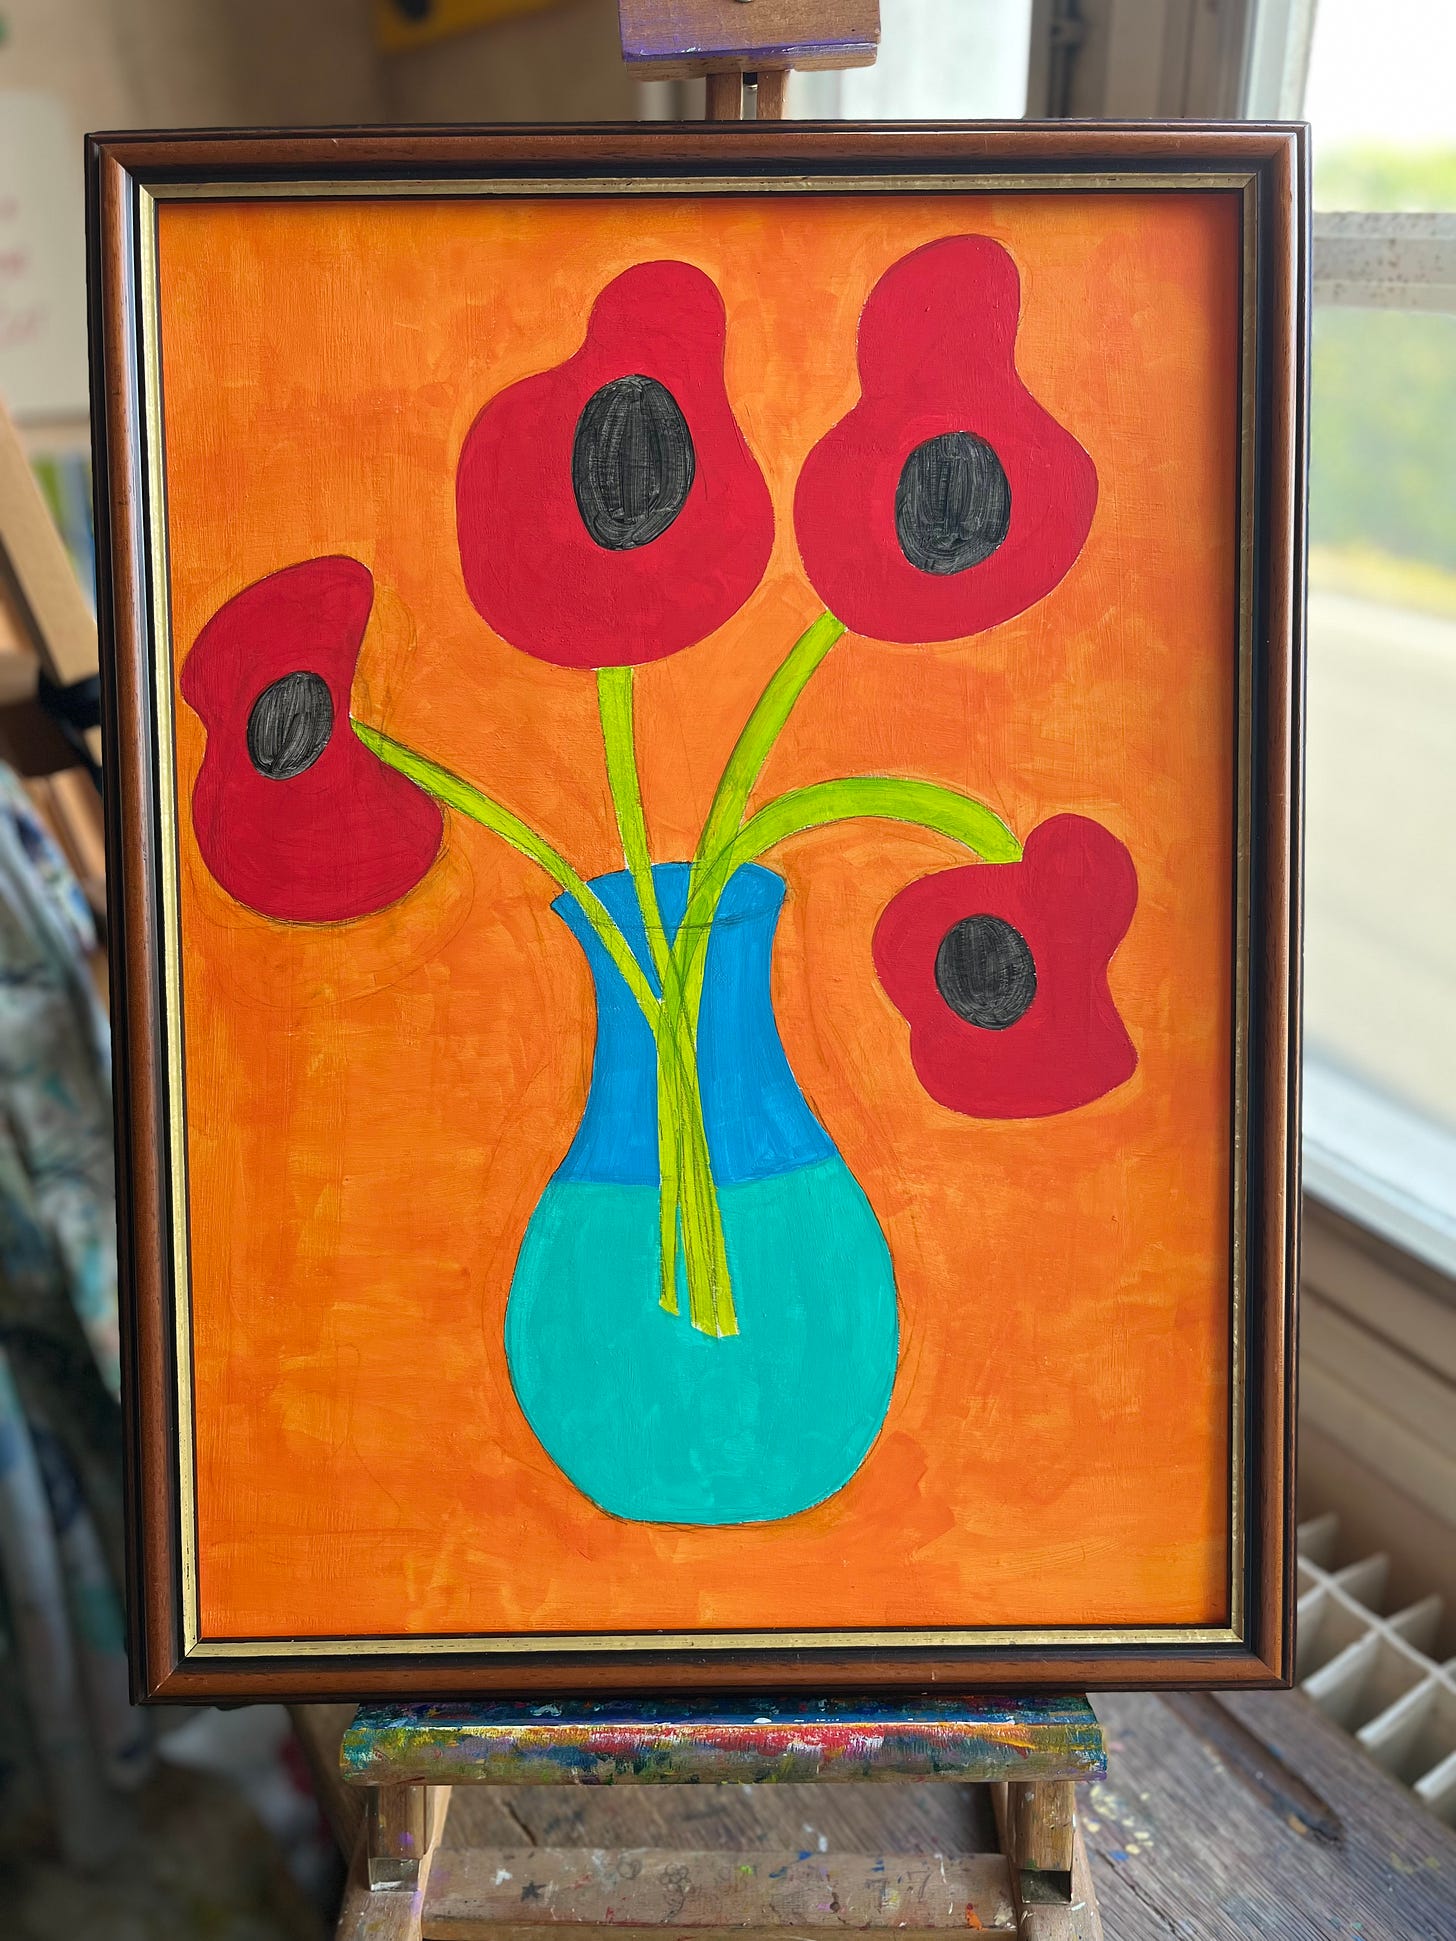 An acrylic painting of four red poppies in a vase on an orange background in a thrifted frame